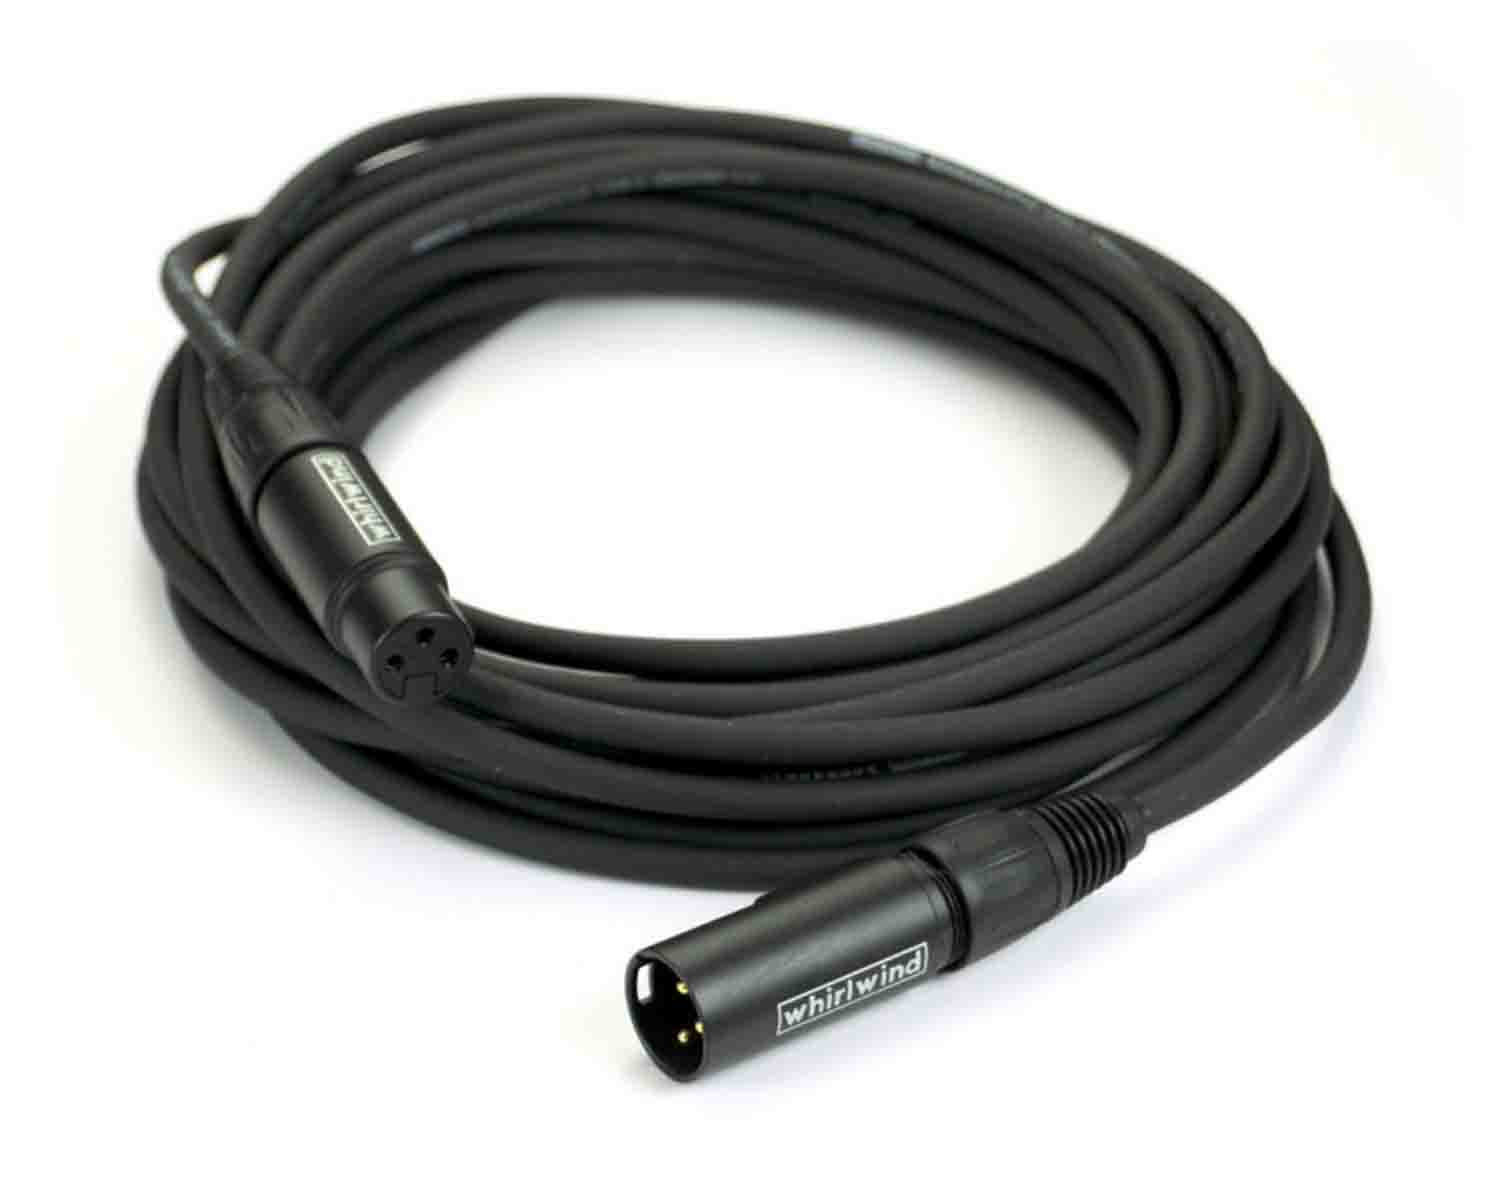 Whirlwind MK420NP Microphone Cable - 20 Foot - Hollywood DJ